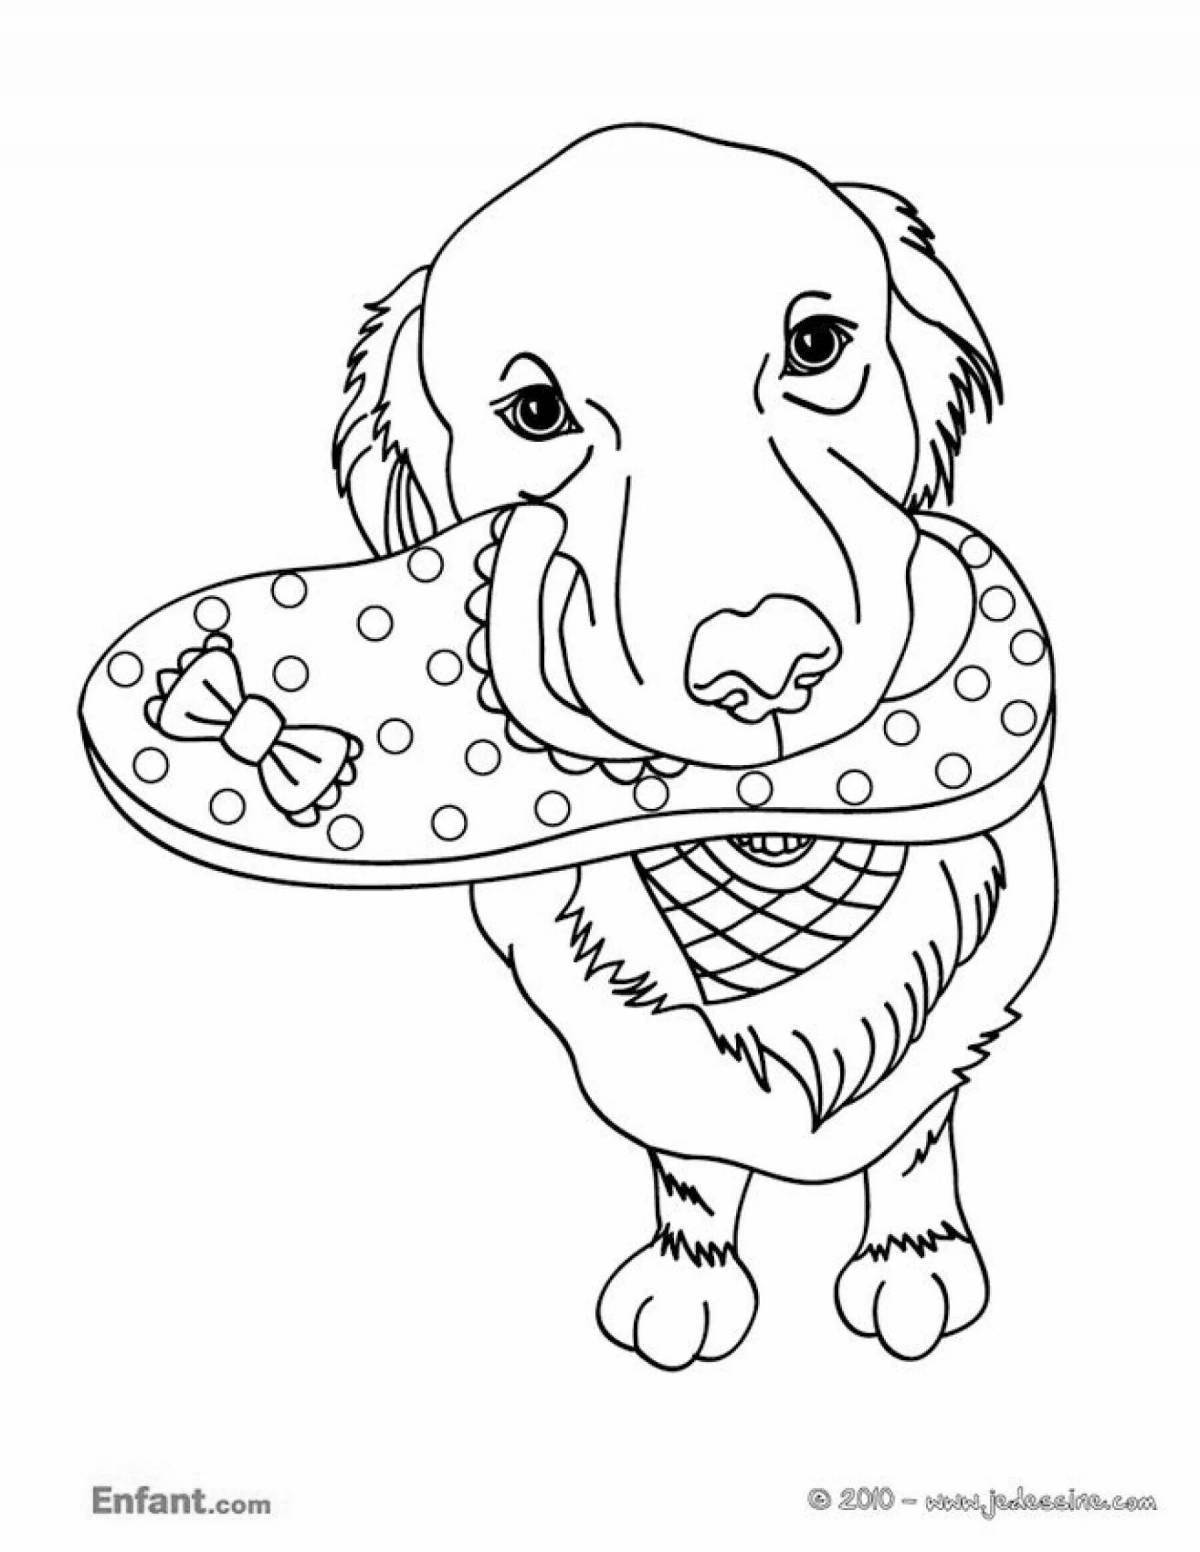 Coloring page adorable spiral dog